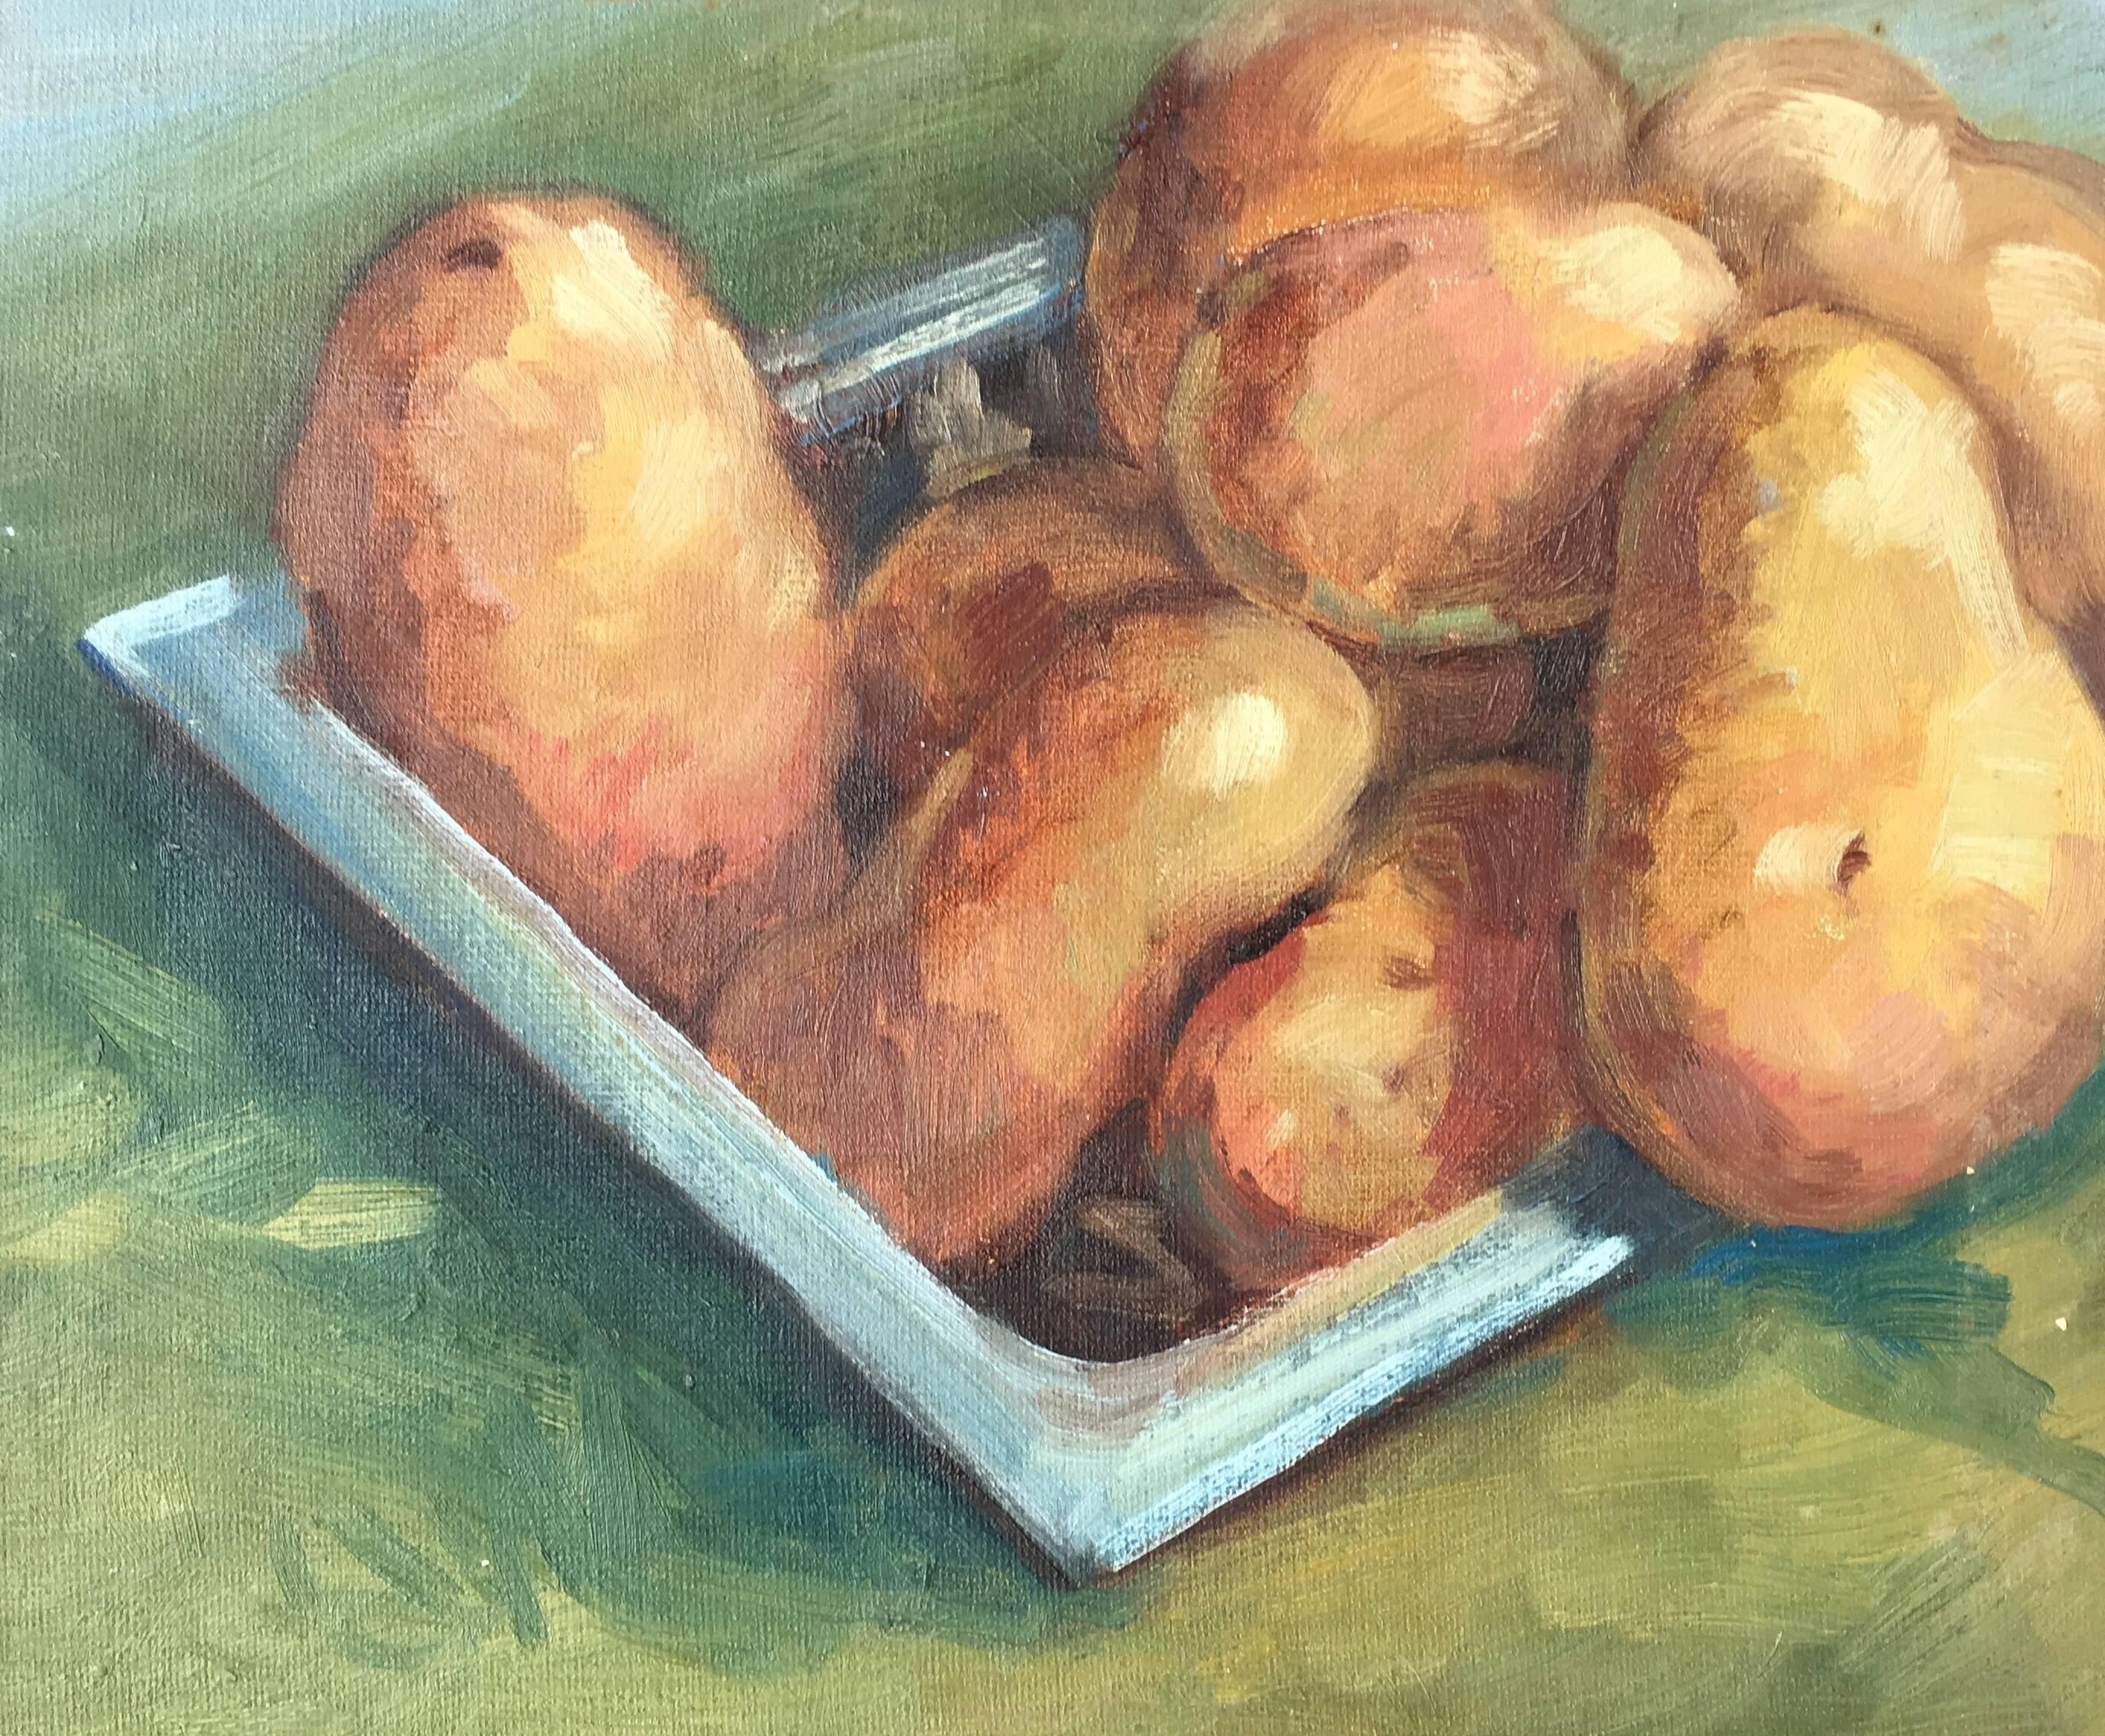 Still life Oil Painting of a Crop of Potatoes 